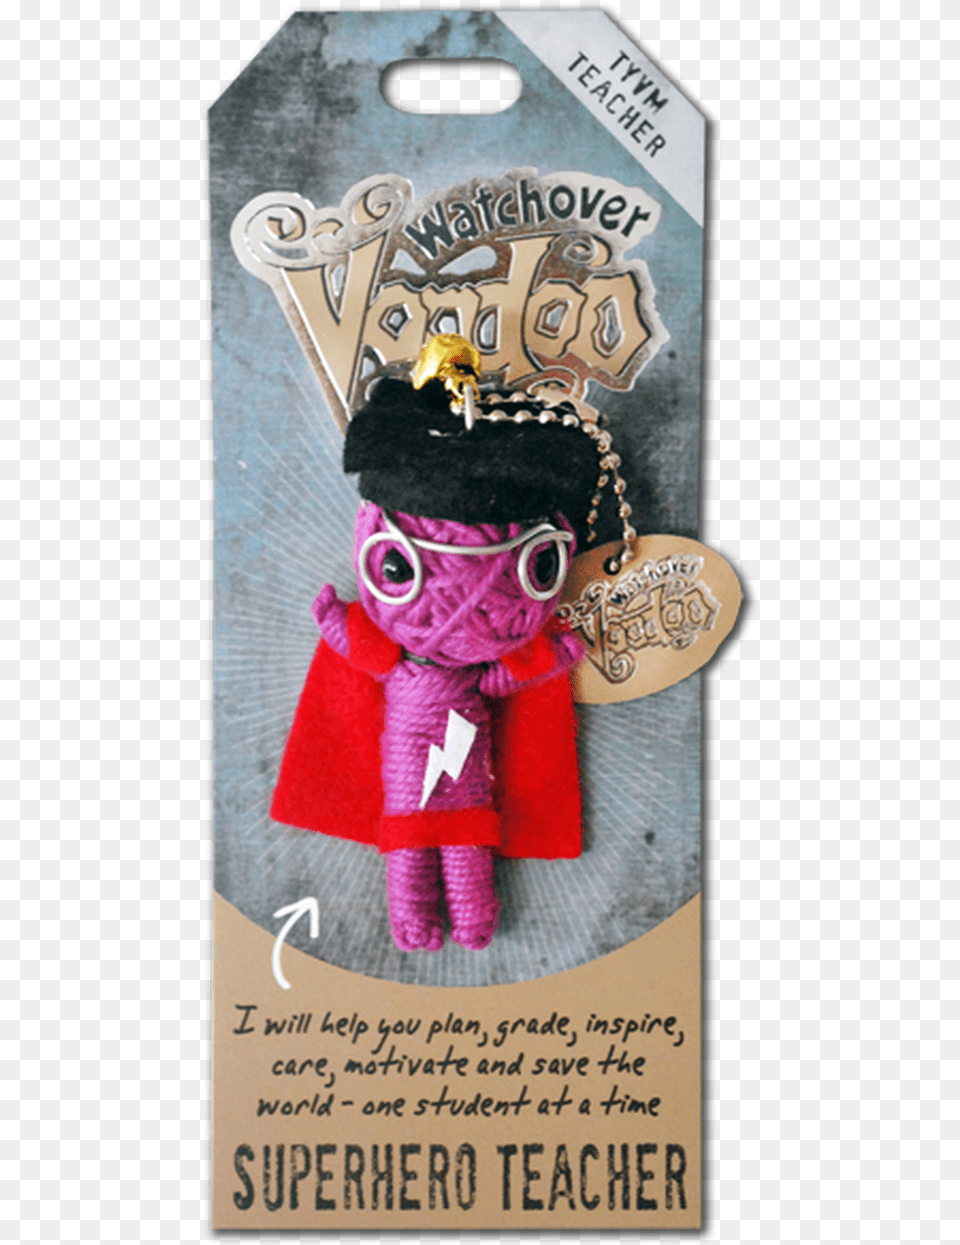 Buy Watchover Voodoo Dolls, Advertisement, Poster, Plush, Toy Free Transparent Png